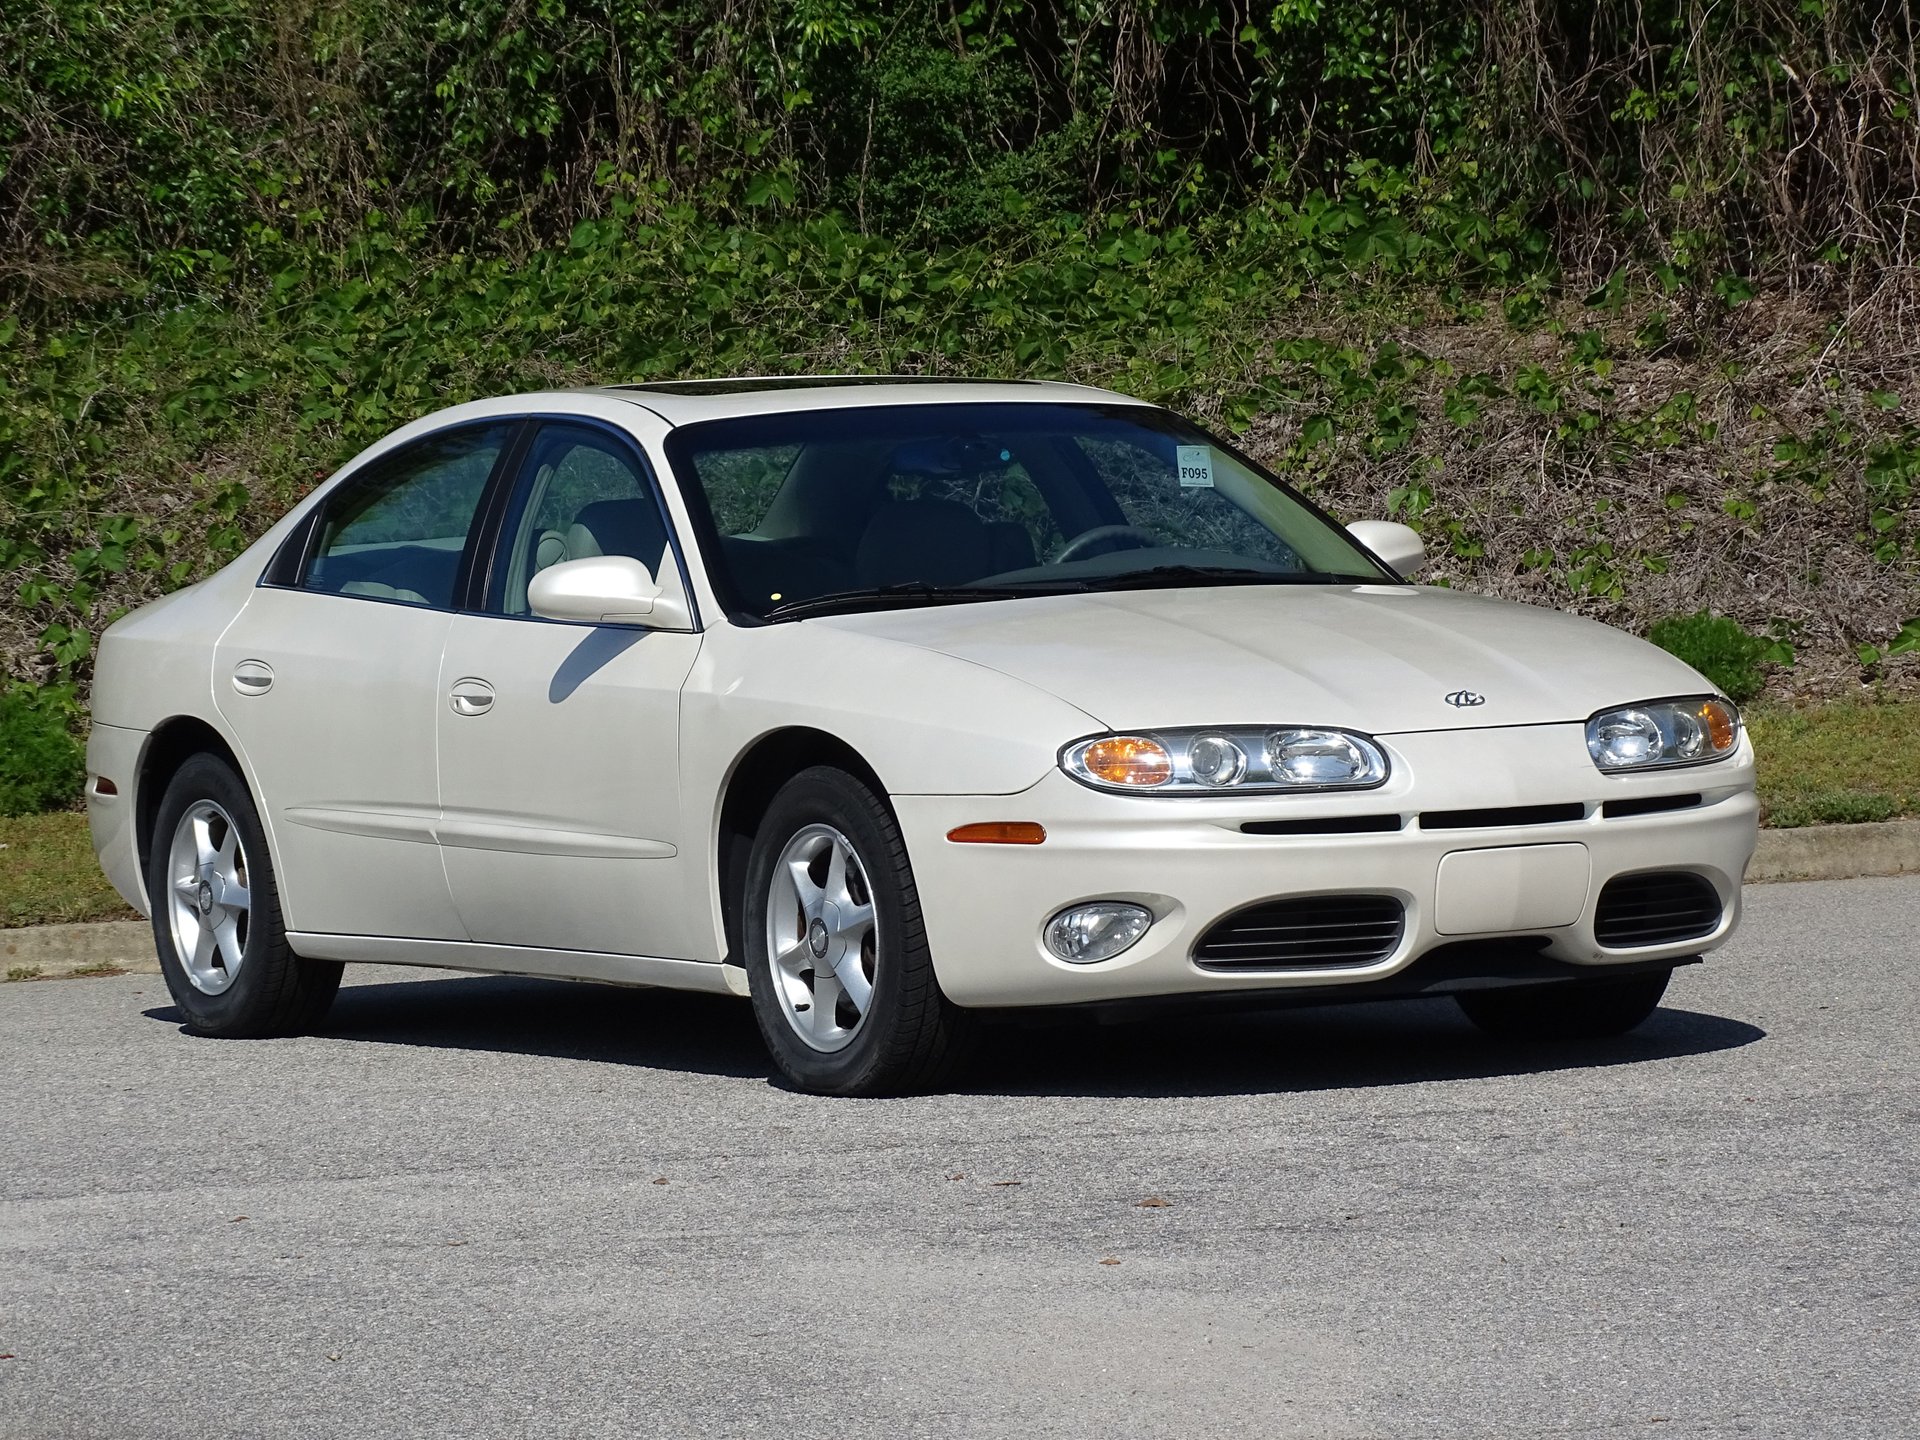 2001 Oldsmobile Aurora | Raleigh Classic Car Auctions